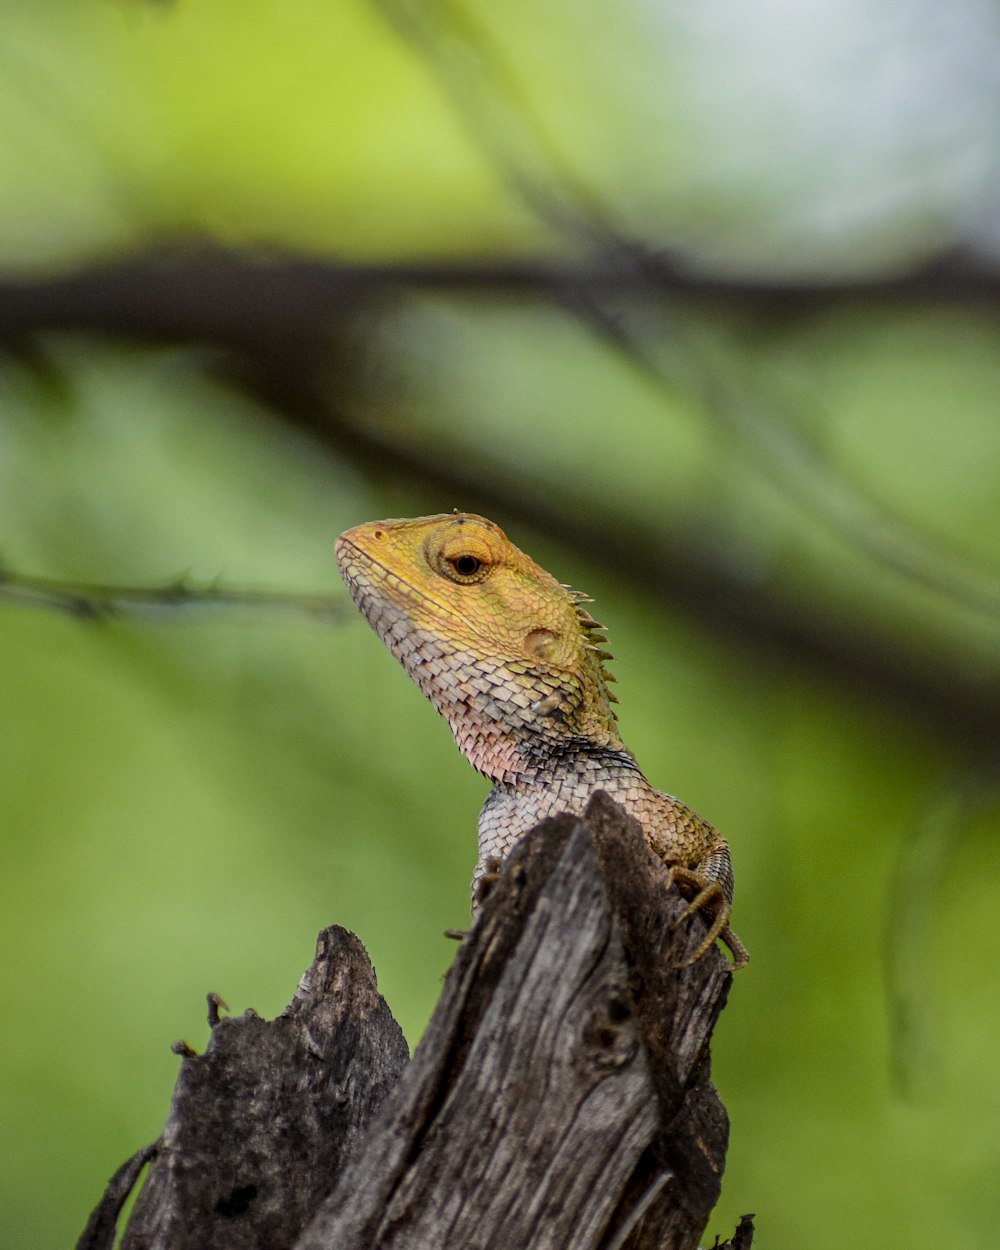 brown and white bearded dragon on brown tree branch